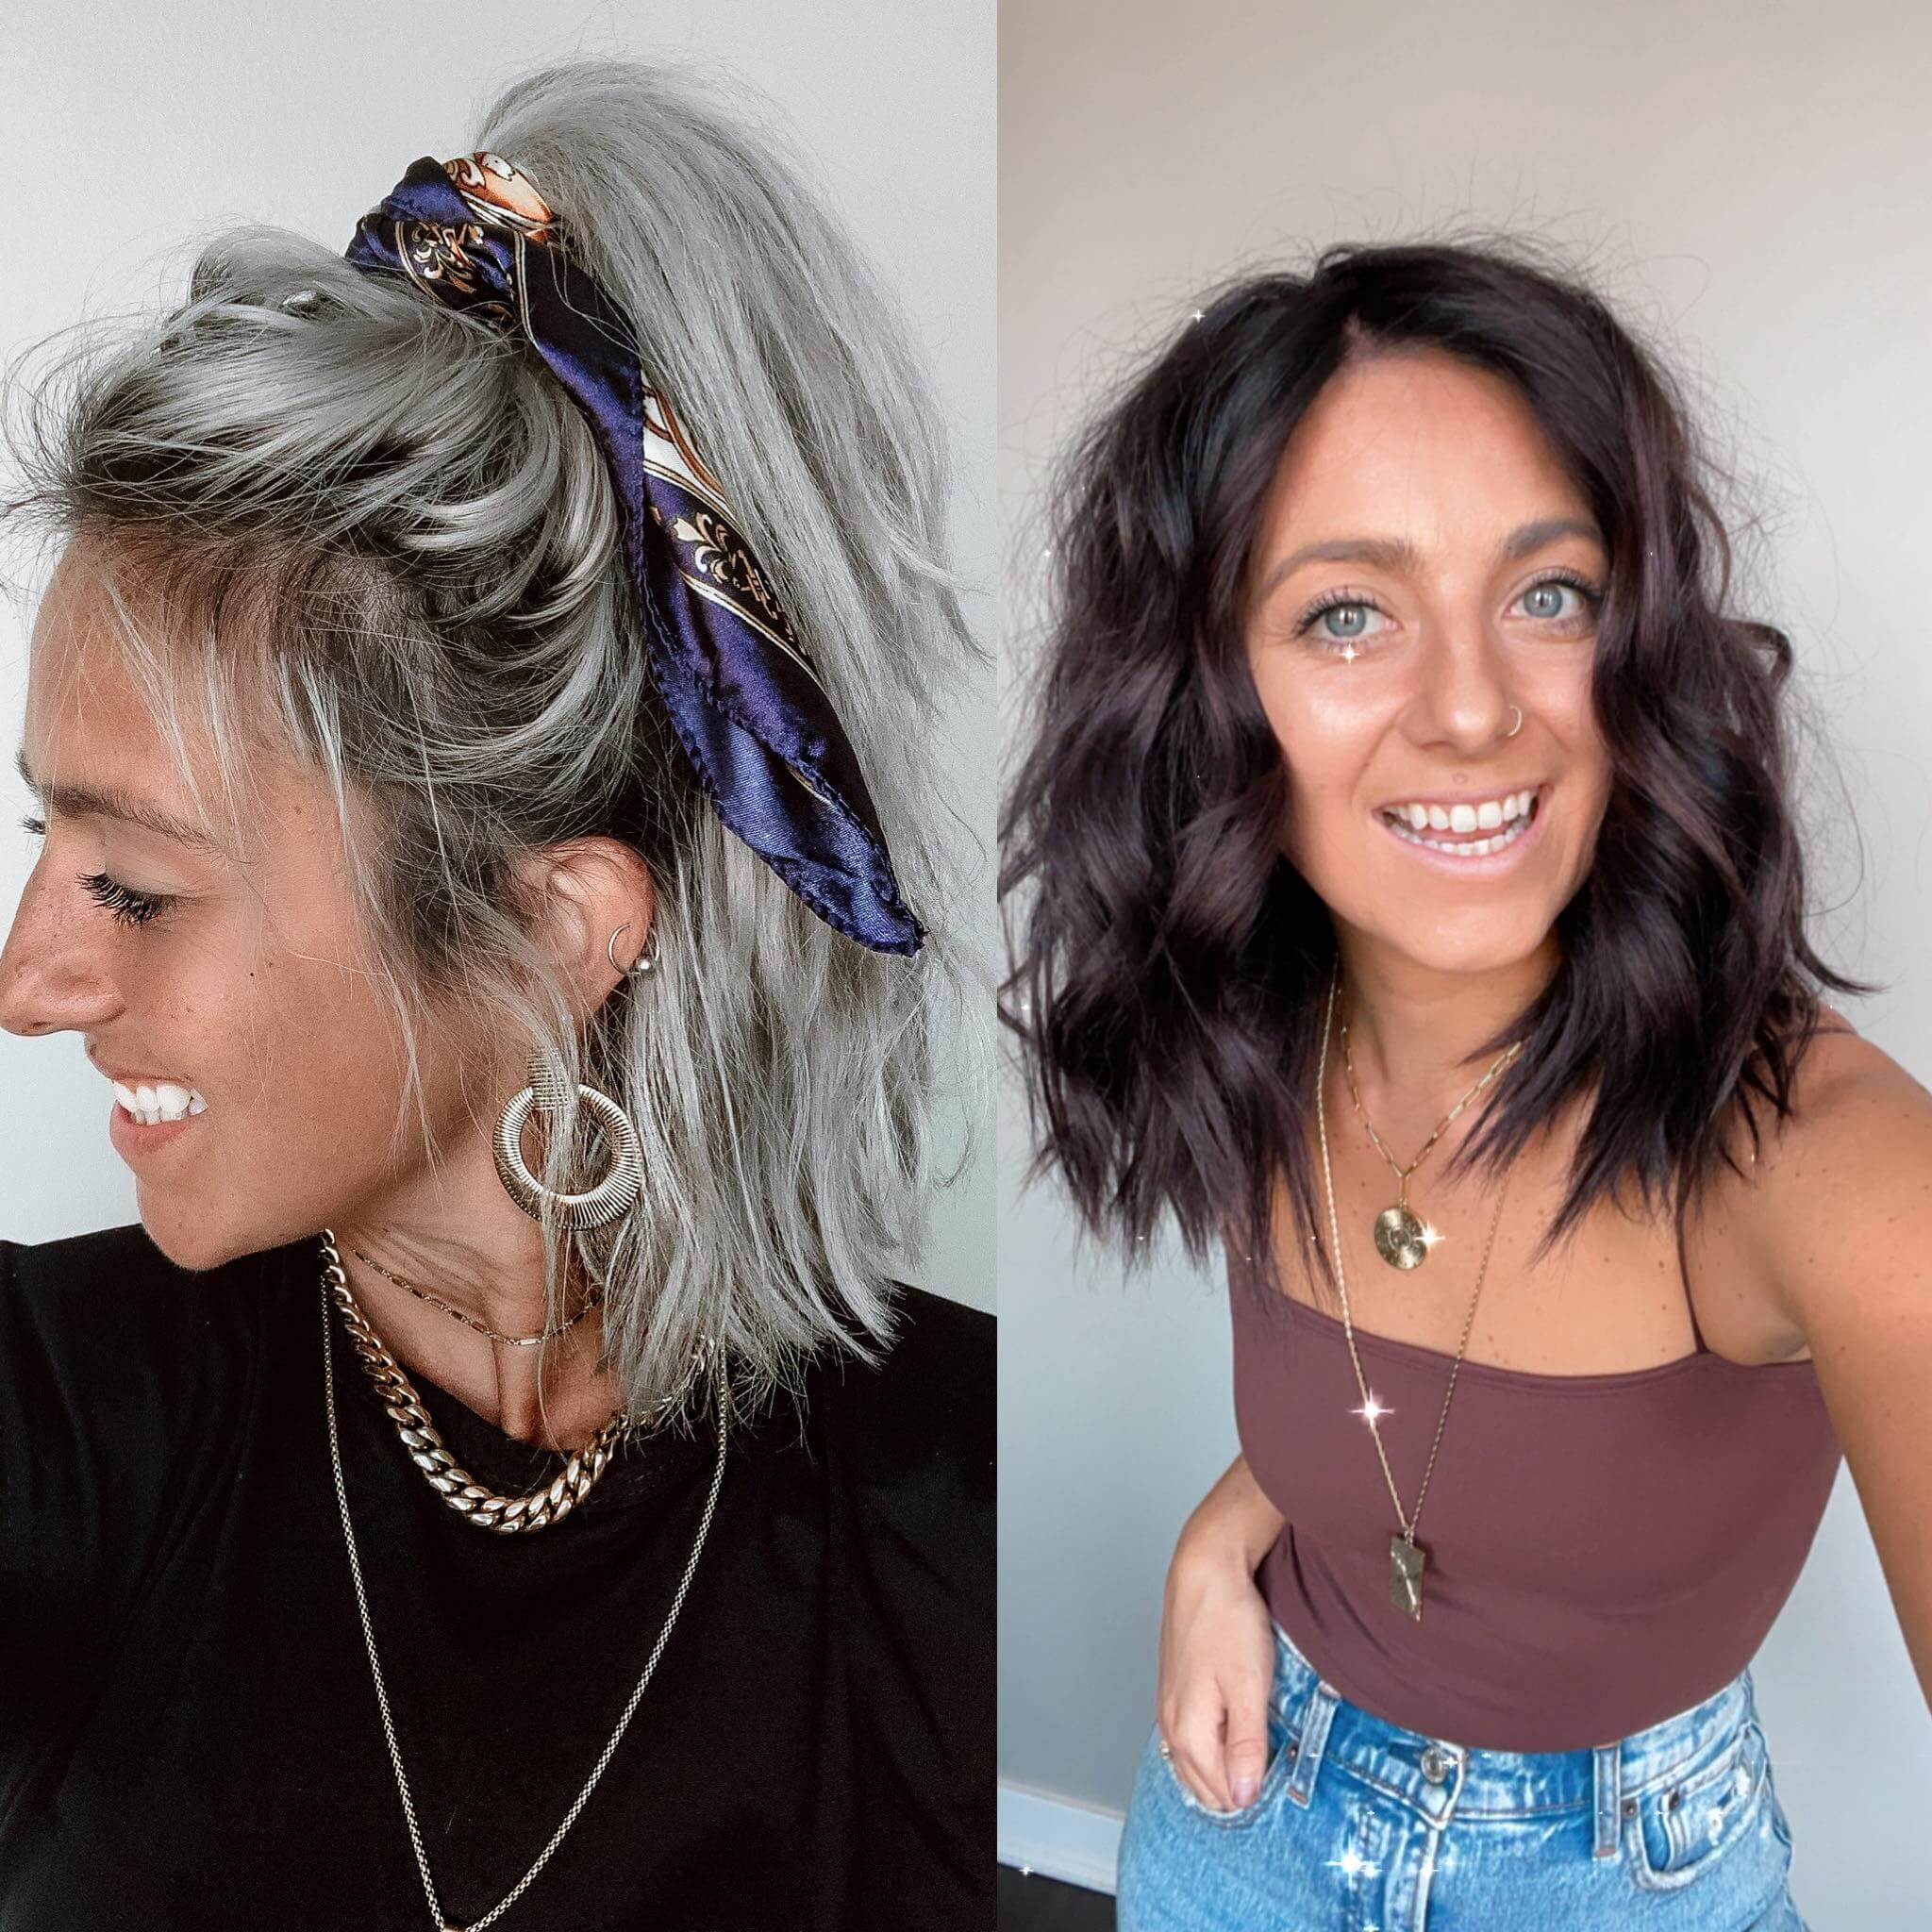 How To Dye Your Hair From Blonde To Brown - The Correct Way